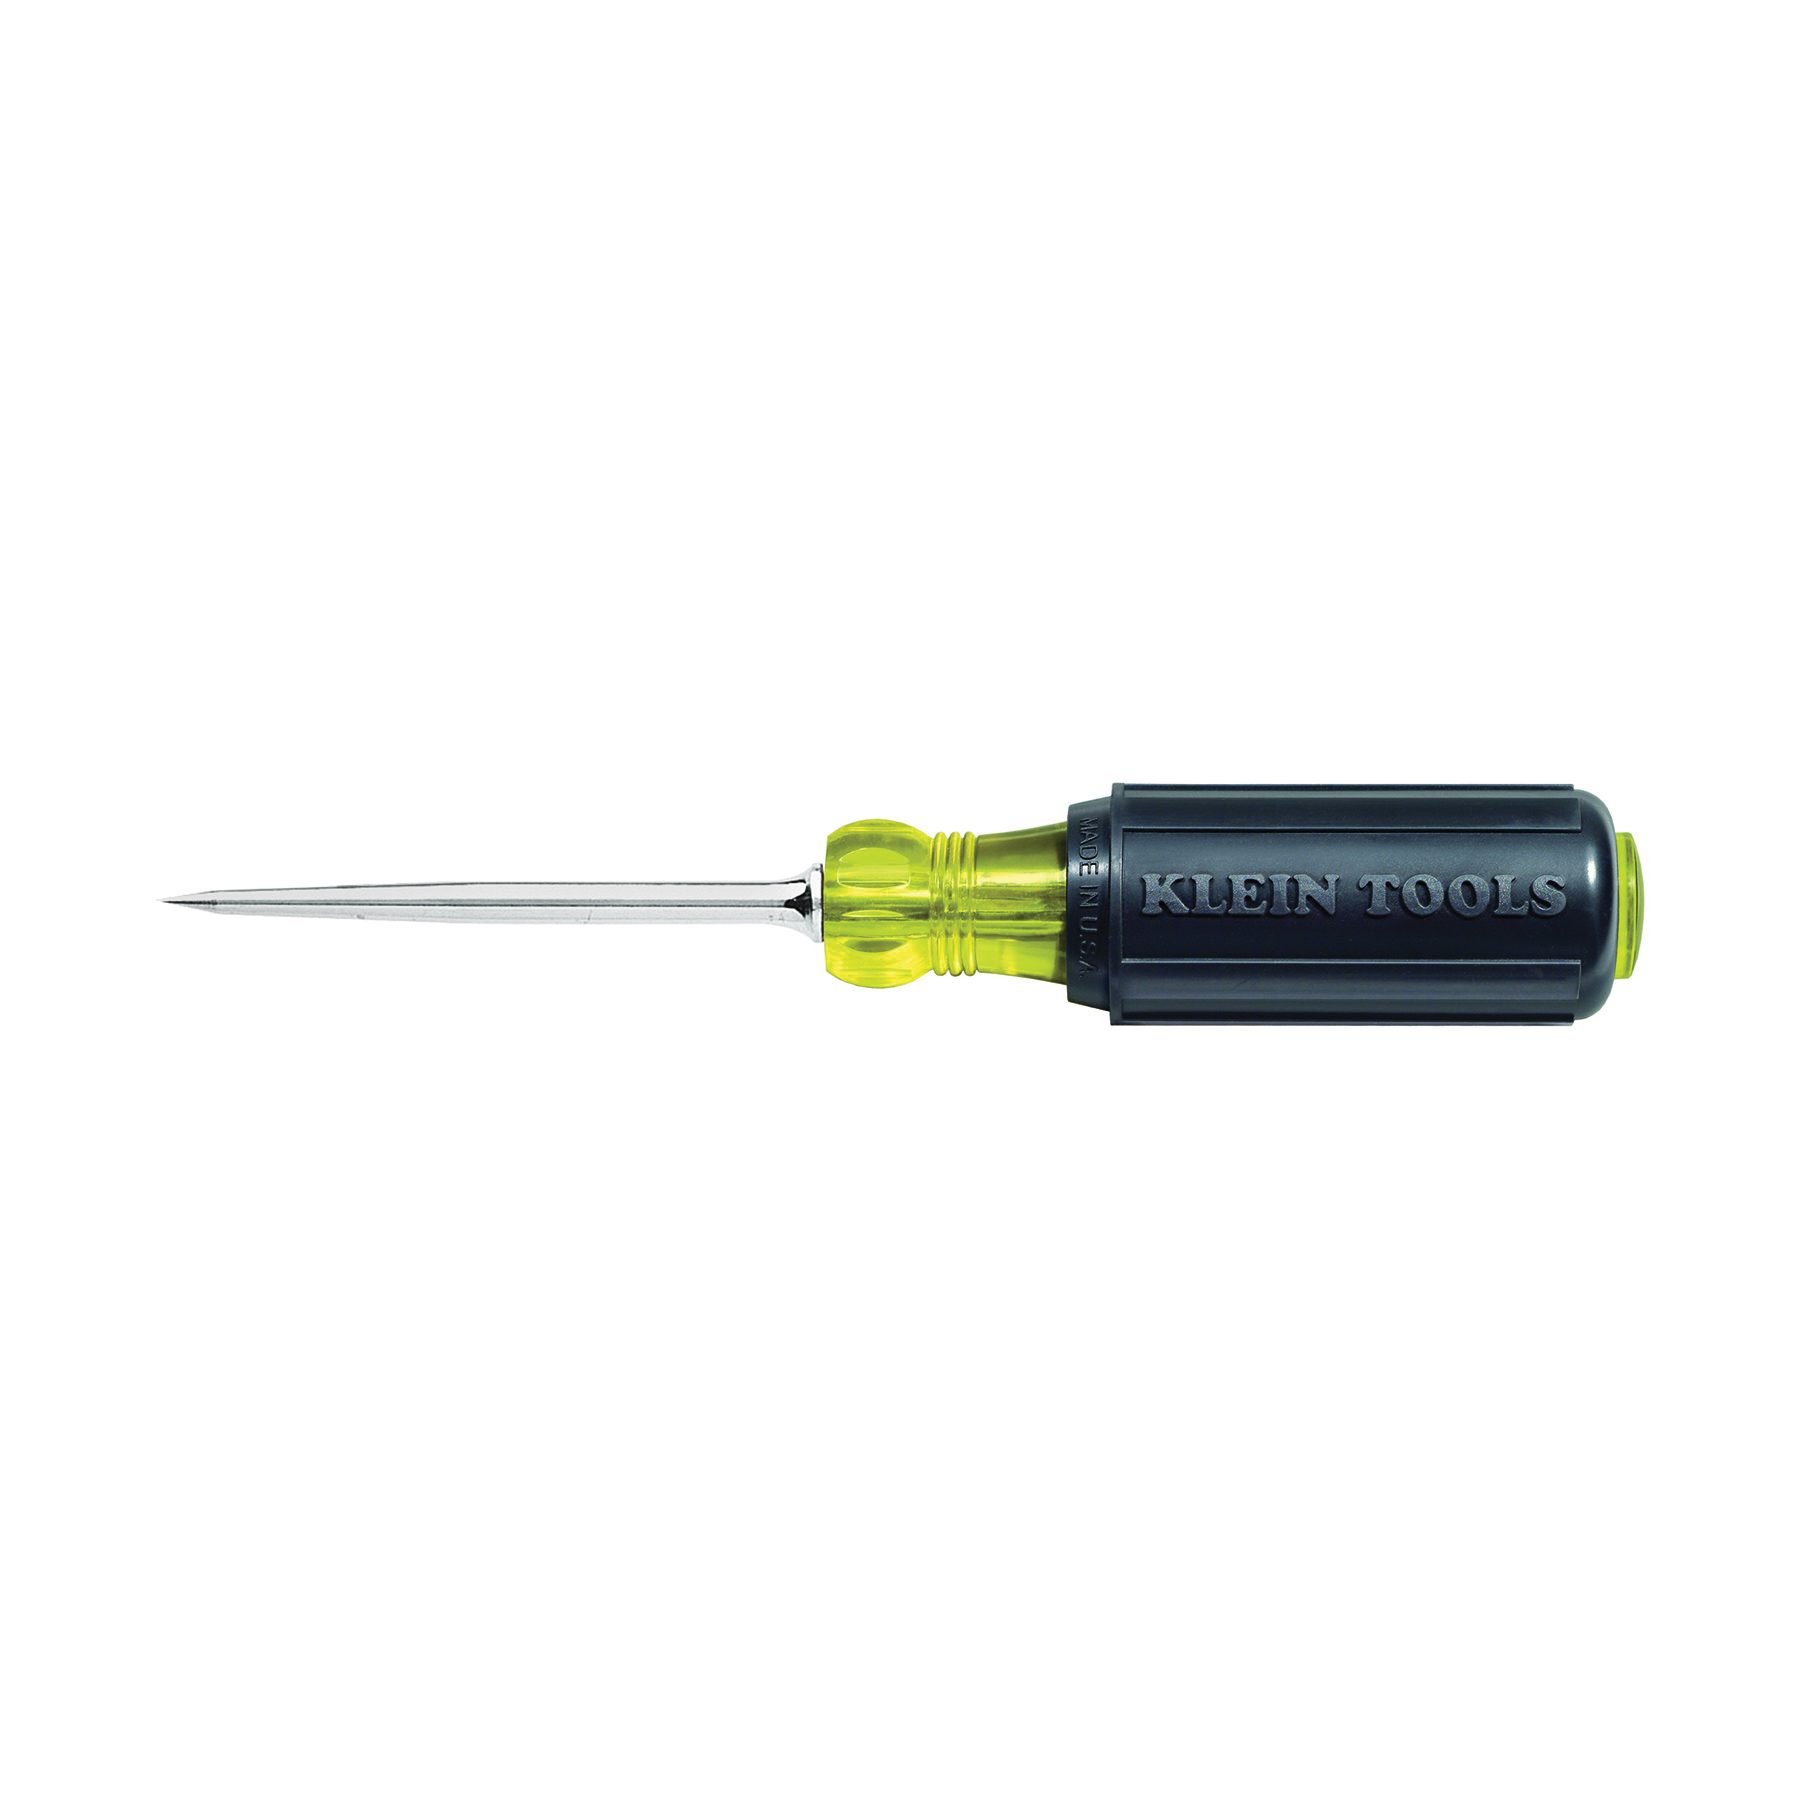 Klein® 650 Scratch Awl, 7-7/8 in OAL, Tempered Steel, Chrome-Plated, Cushion Grip Handle, Plastic Handle, 3-1/2 in Shank